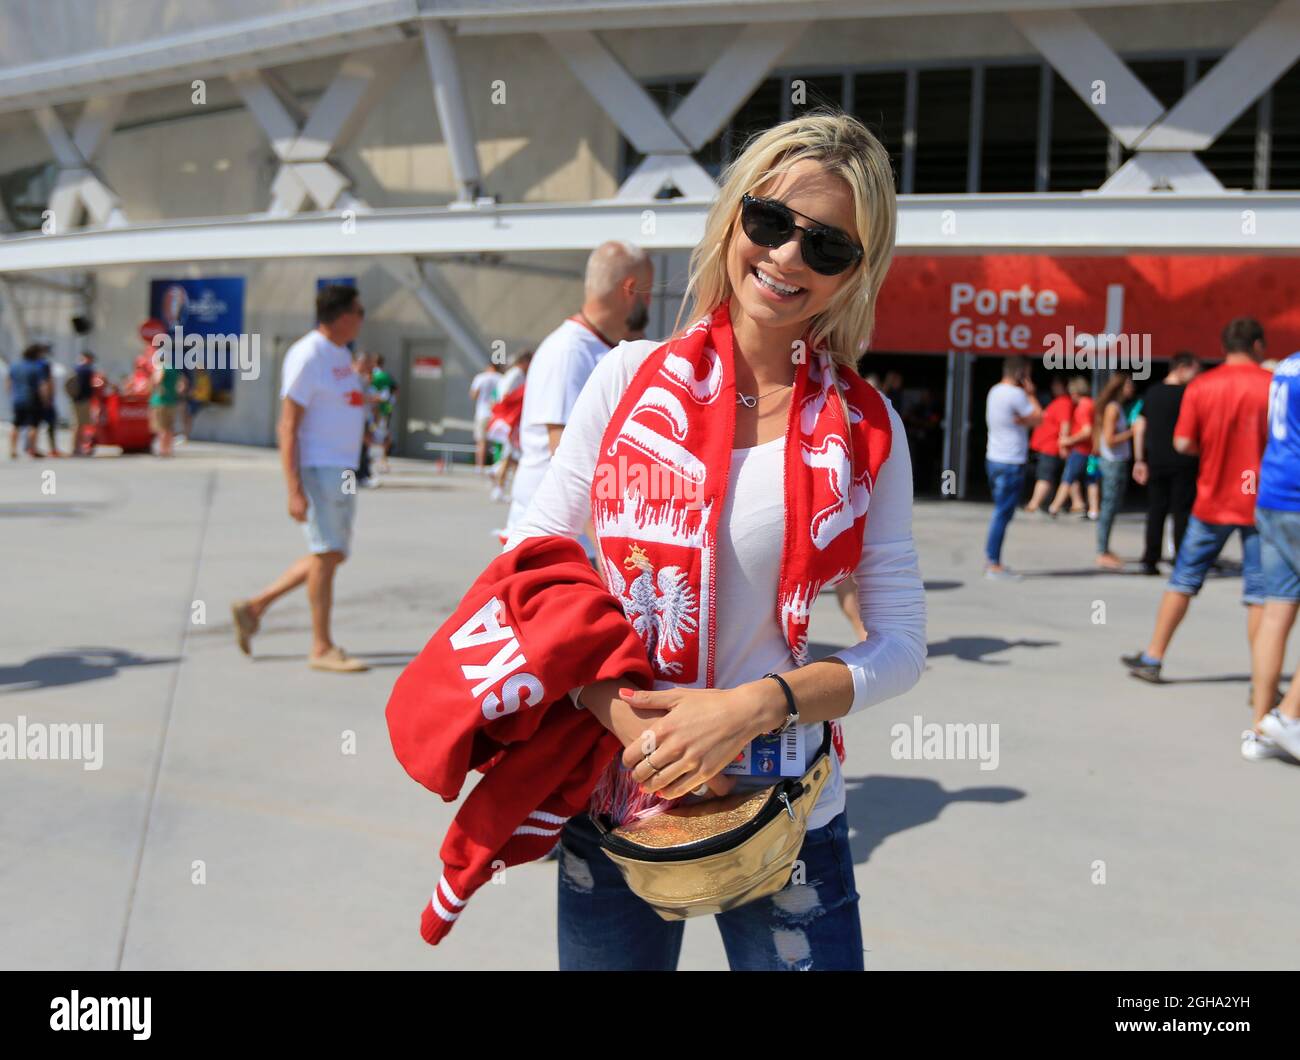 A Polish fans enjoys the atmosphere before the UEFA European Championship 2016 match at the Allianz Riviera, Nice. Picture date June 12th, 2016 Pic David Klein/Sportimage  Stock Photo